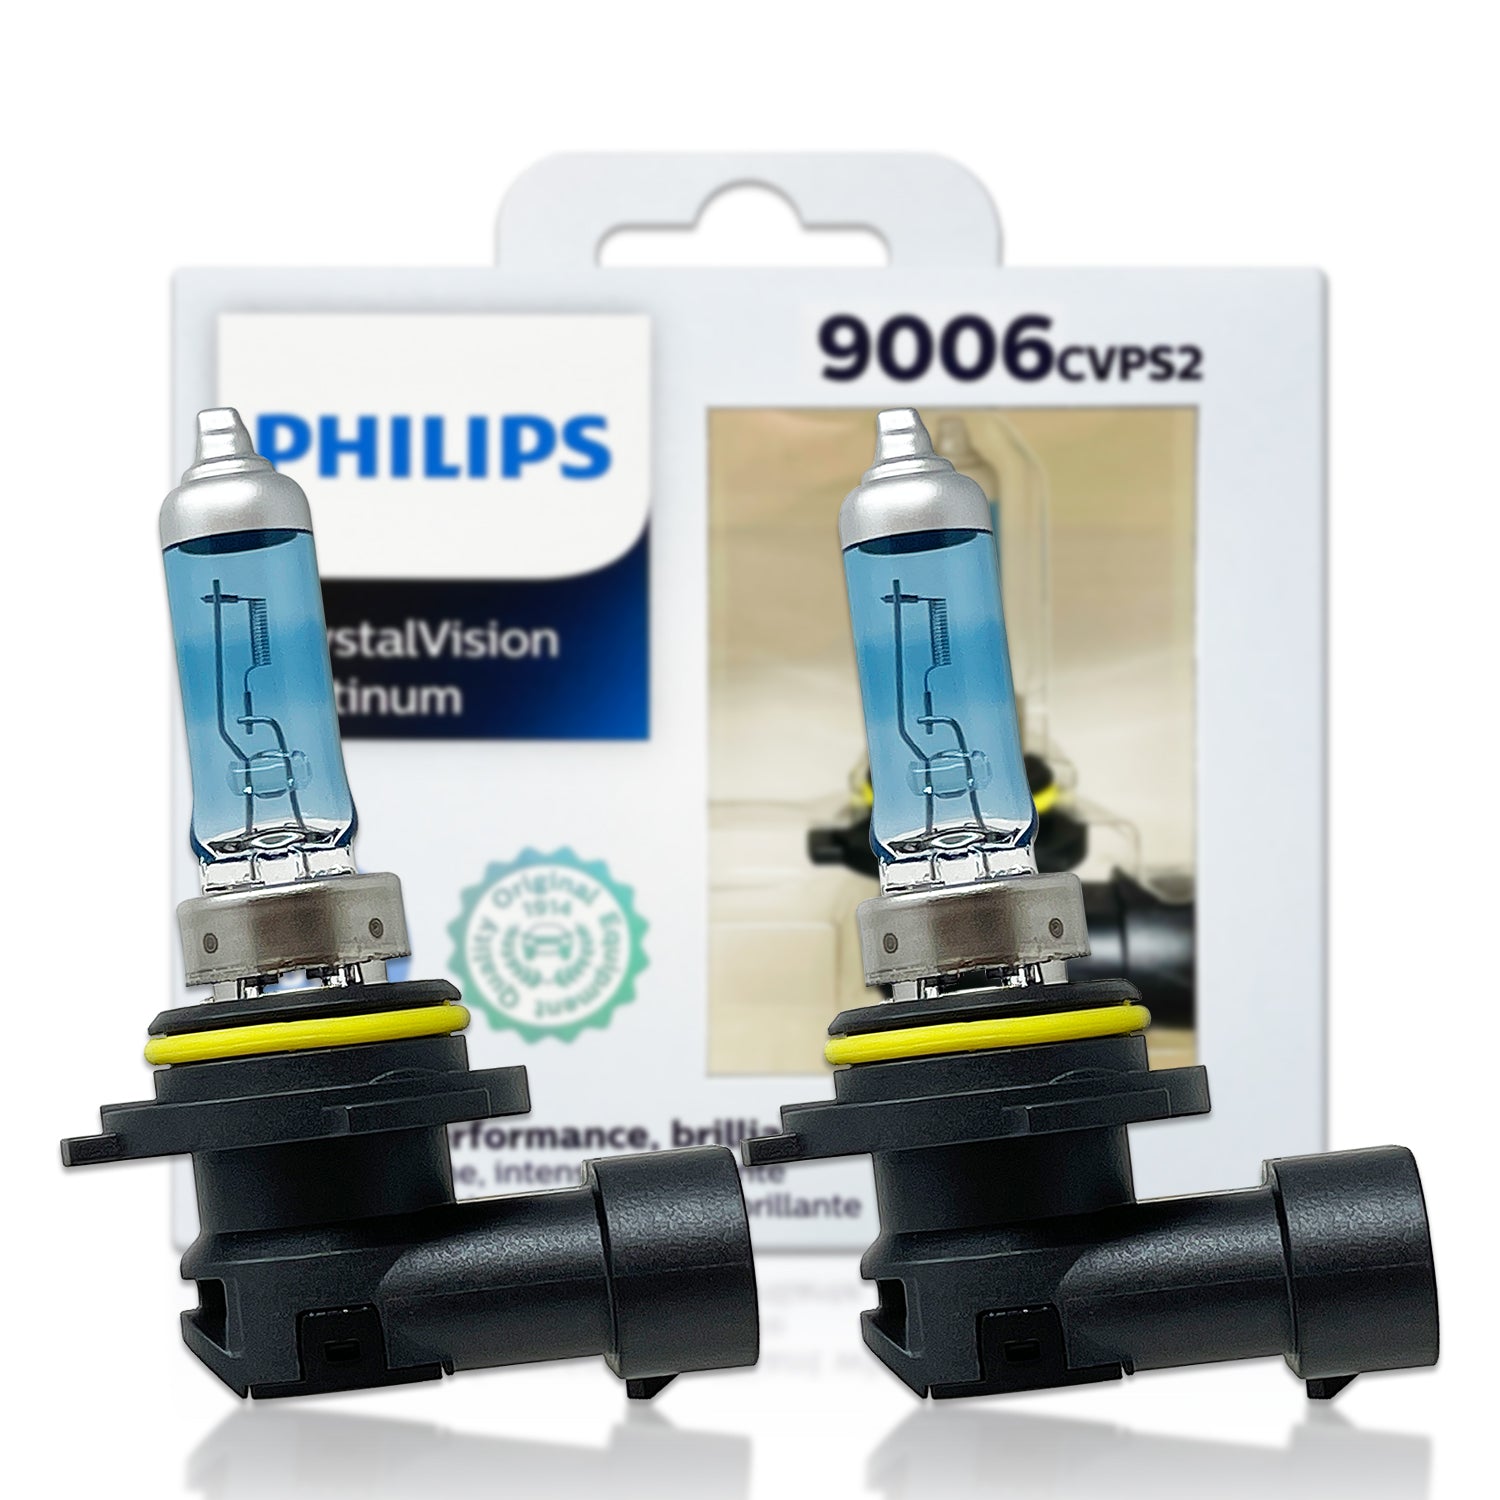 HCX Philips H7 to D2S Rebased HID Xenon Bulbs